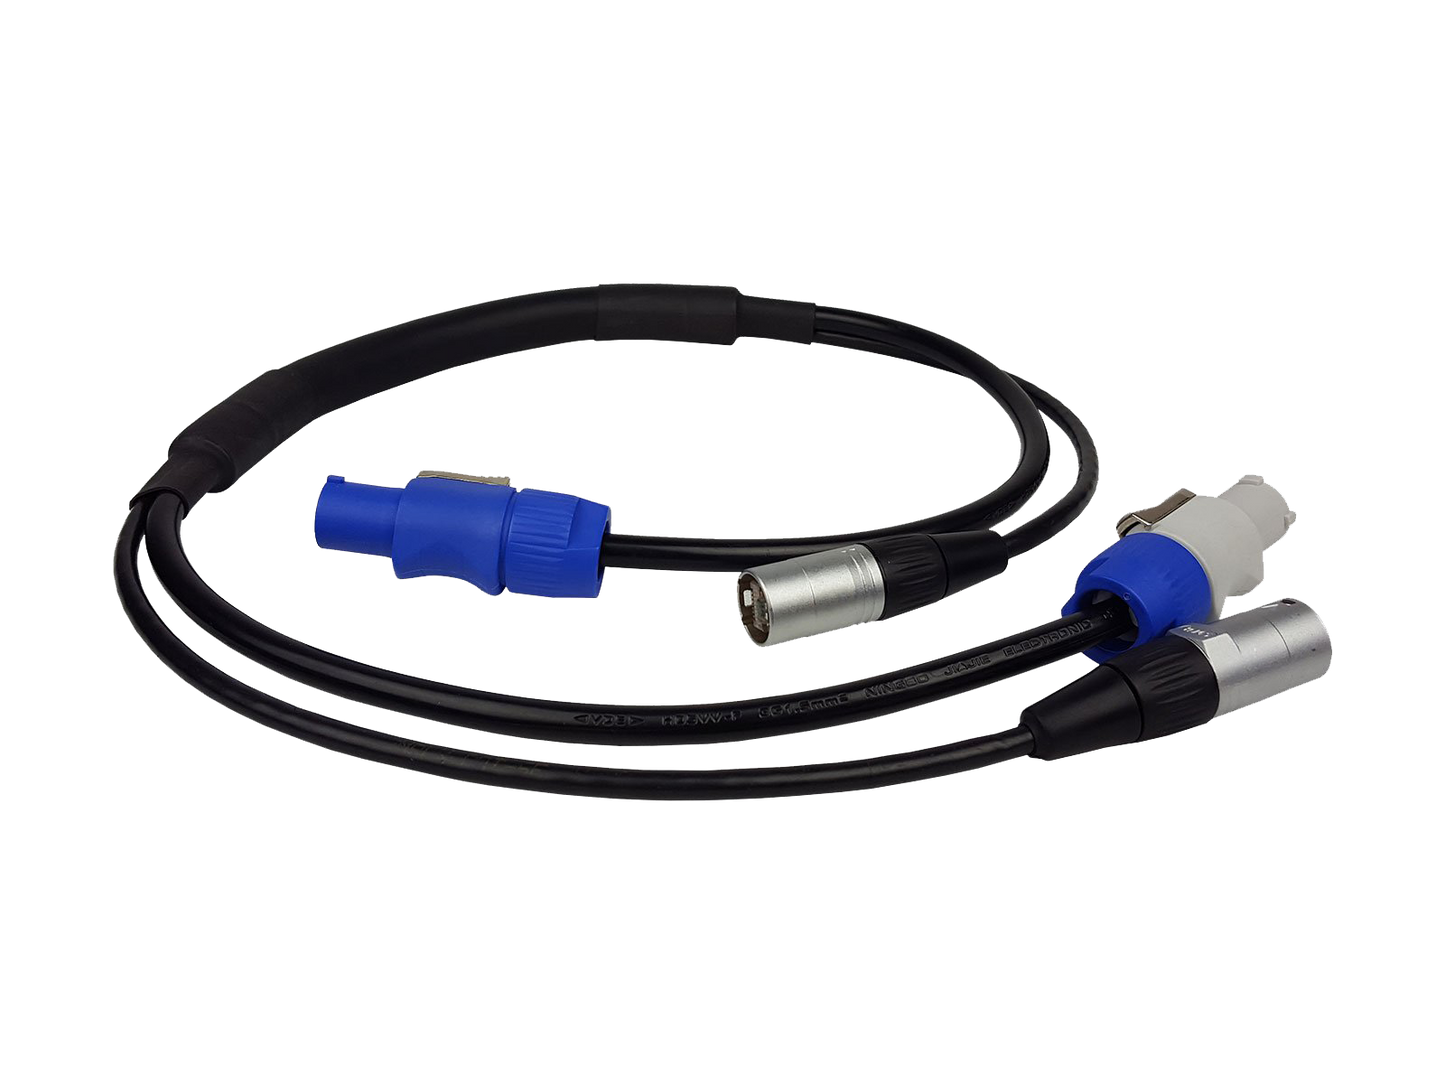 Blizzard Cool Cables EtherCON PowerCON Combo 10'